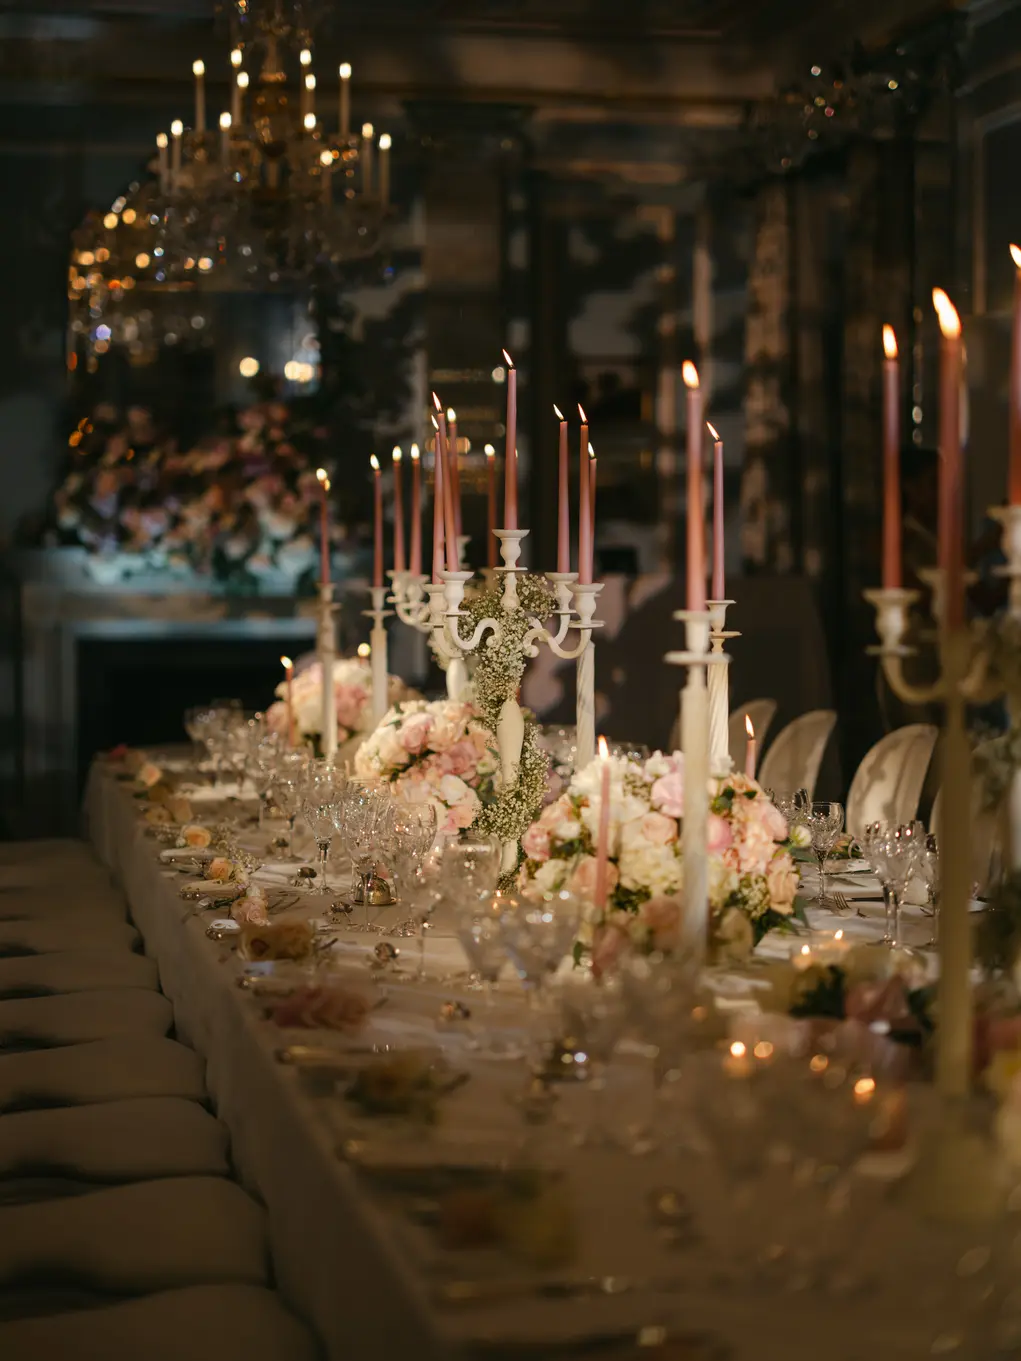 A dining table with candles, flowers and a white tablecloth